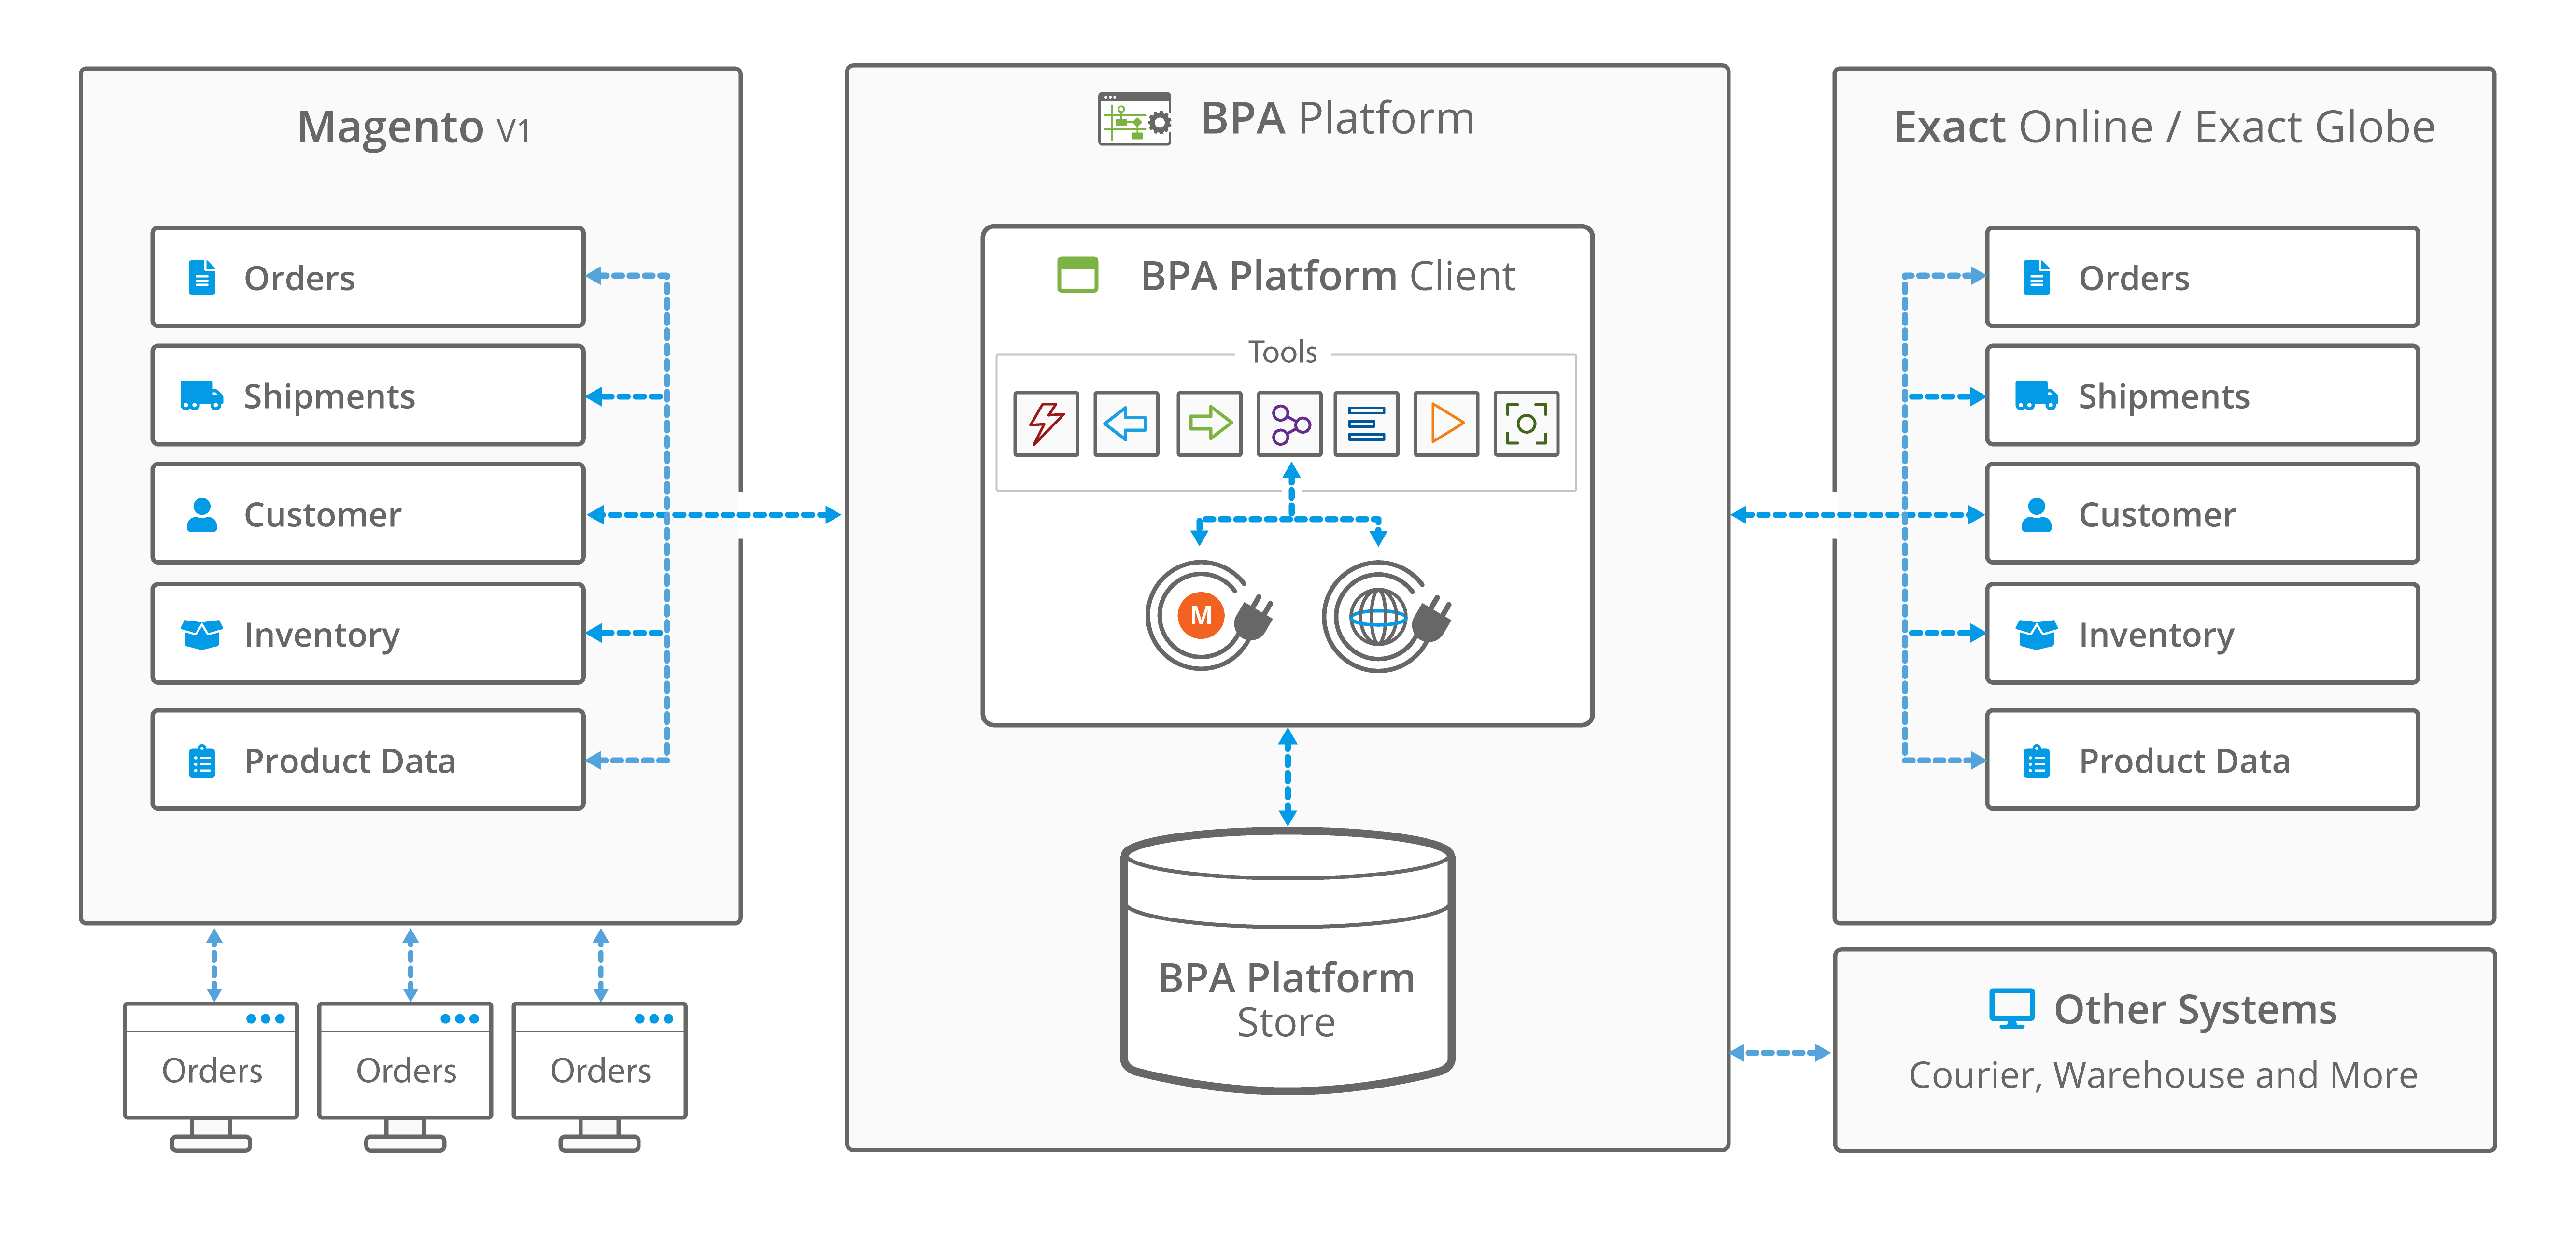 Exact Online Magento integration solution architecture from BPA Platform